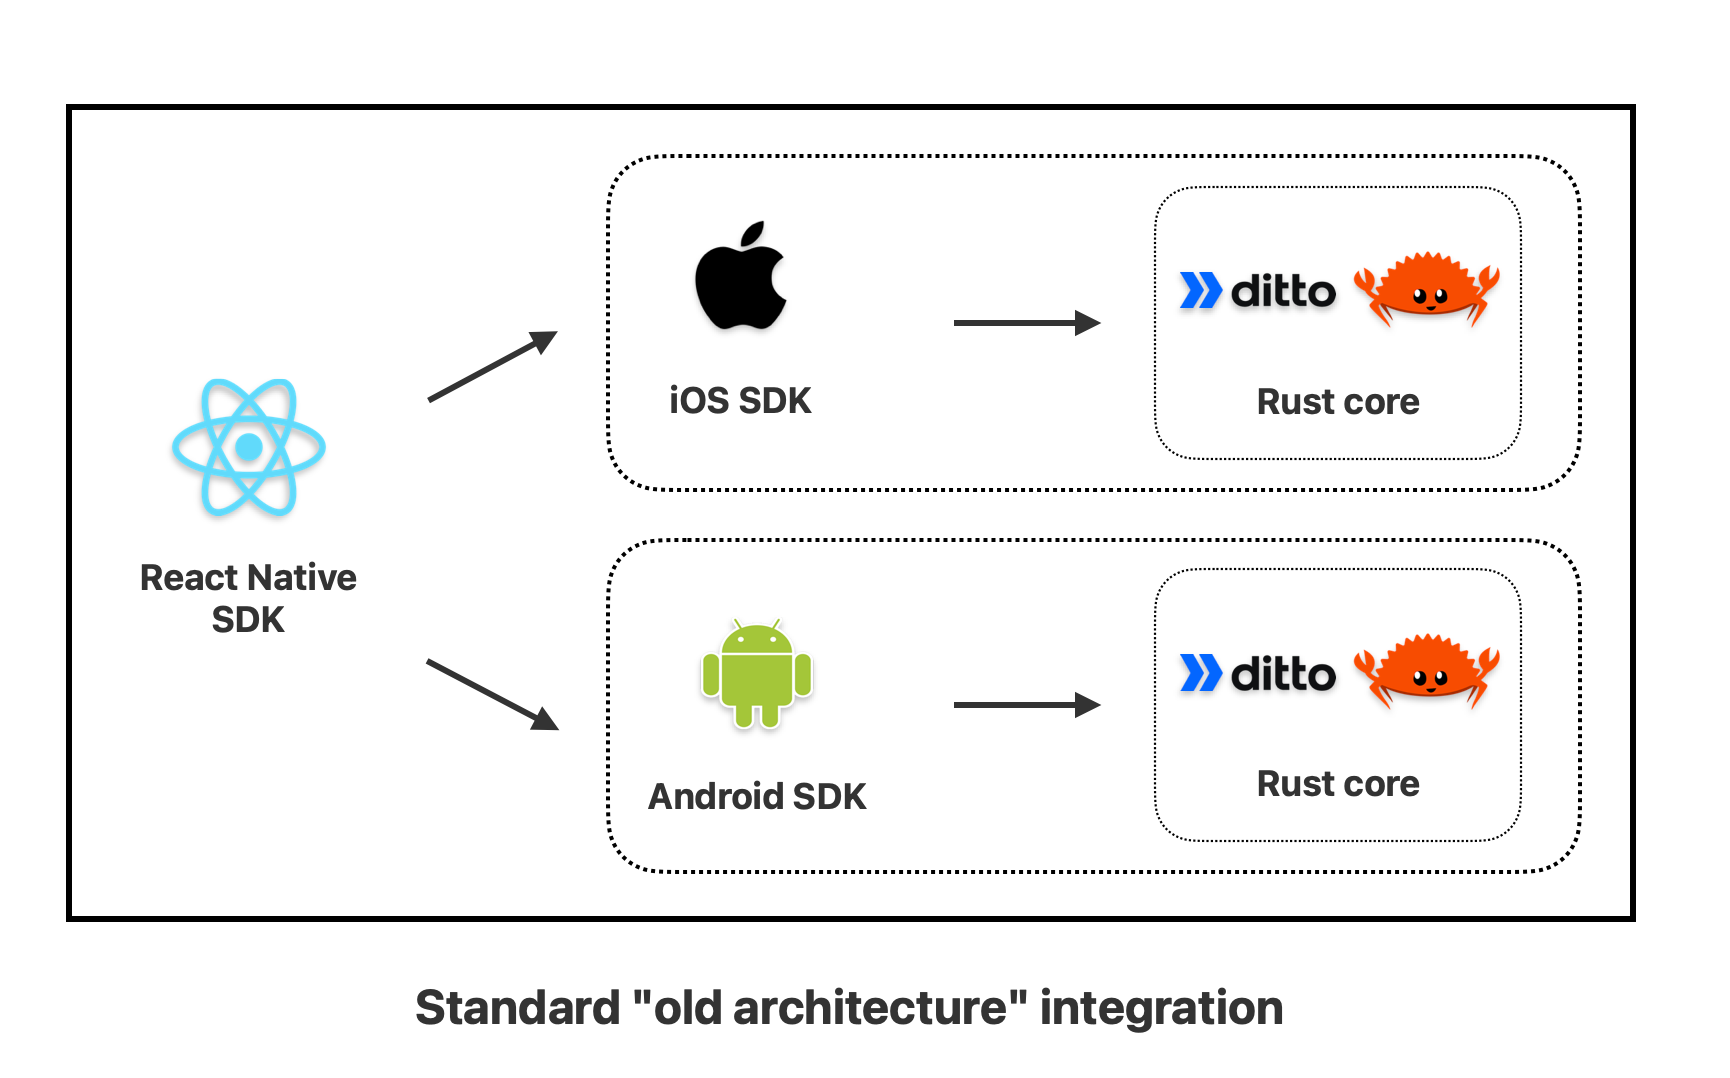 Standard old architecture integration for React Native